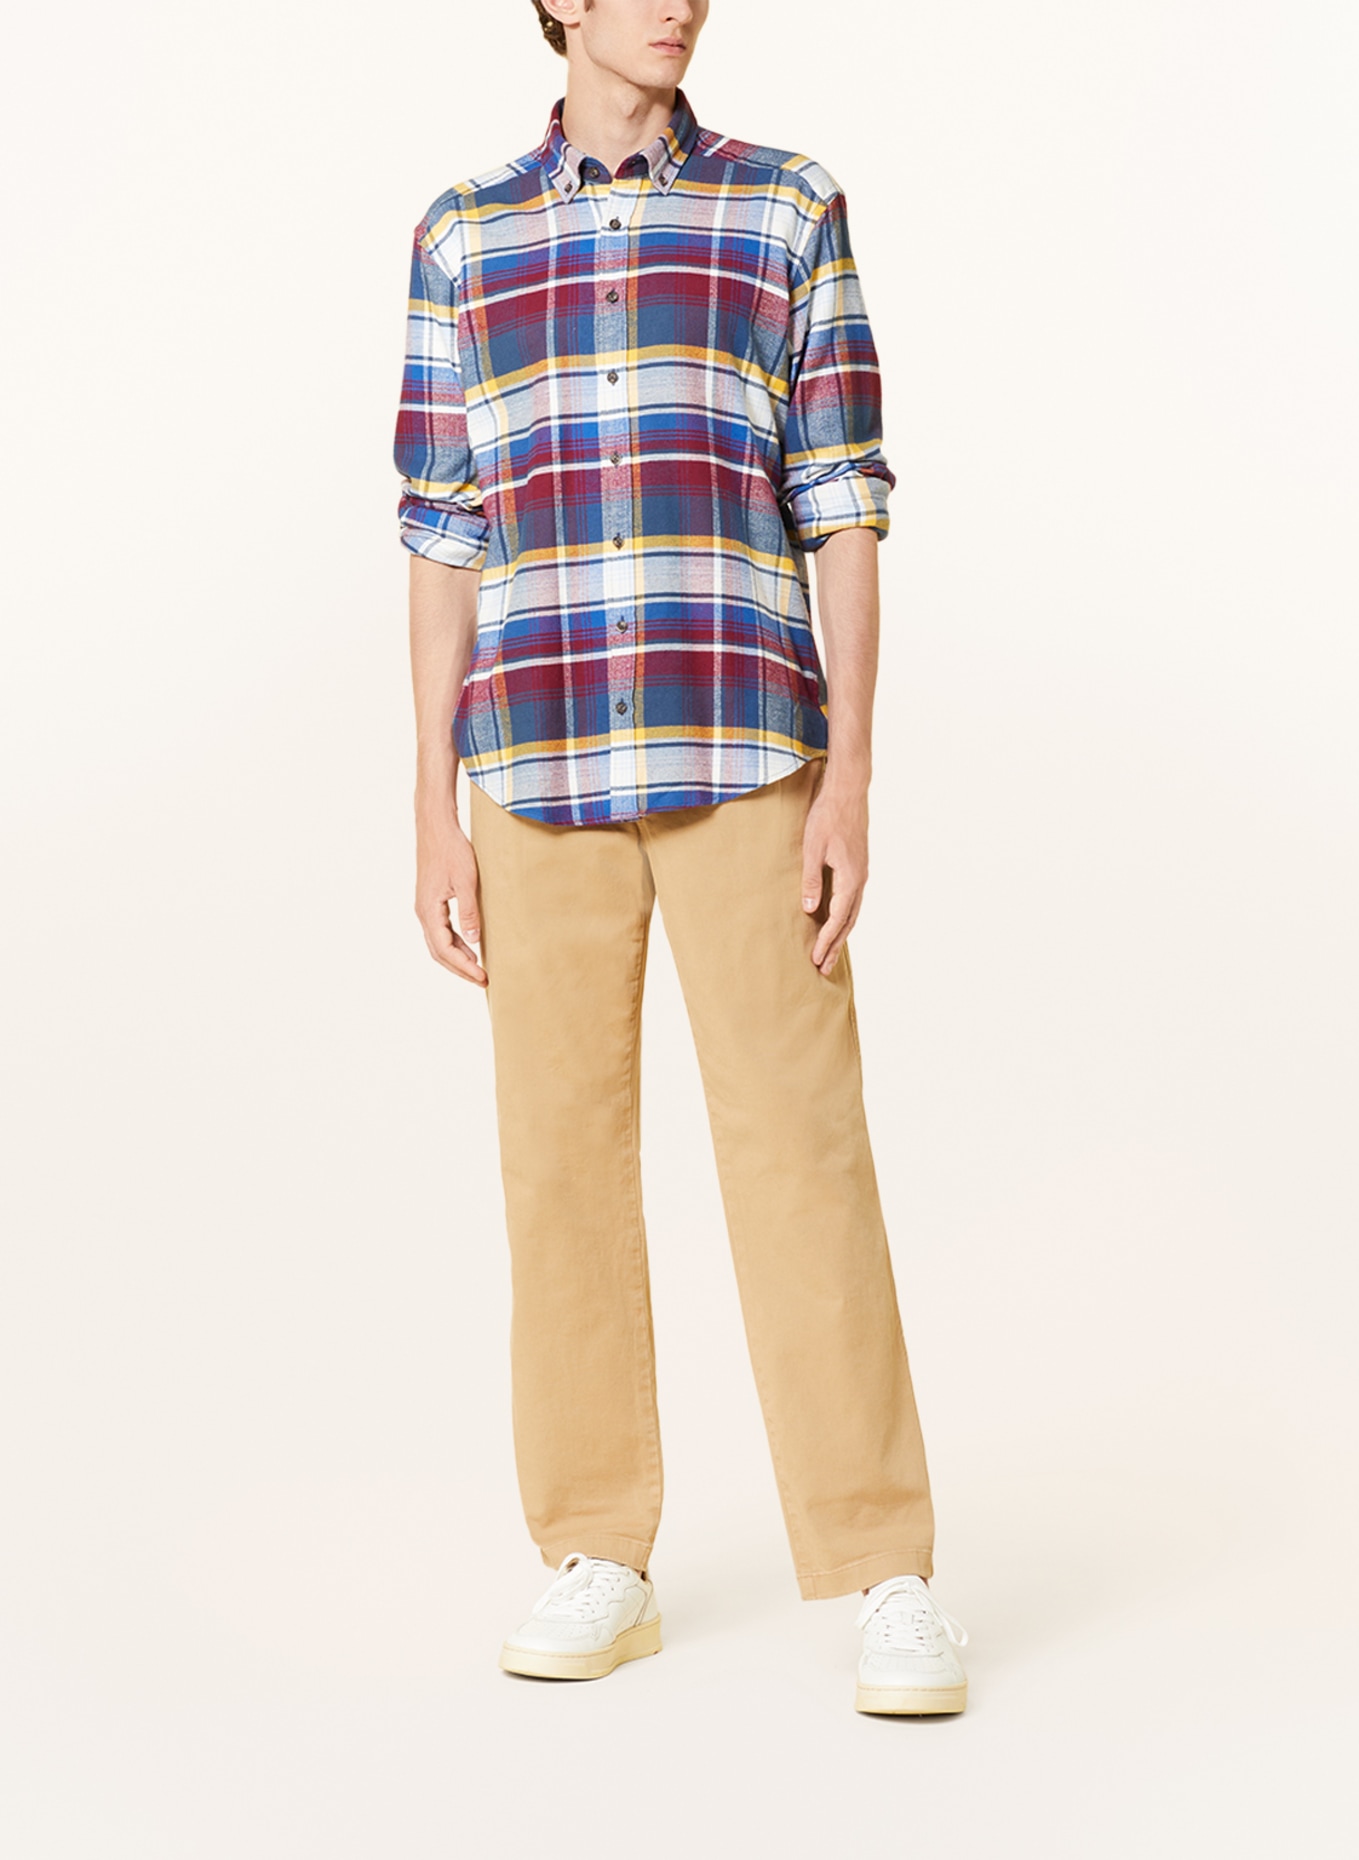 STROKESMAN'S Flannel shirt regular fit, Color: YELLOW/ DARK RED/ BLUE (Image 2)